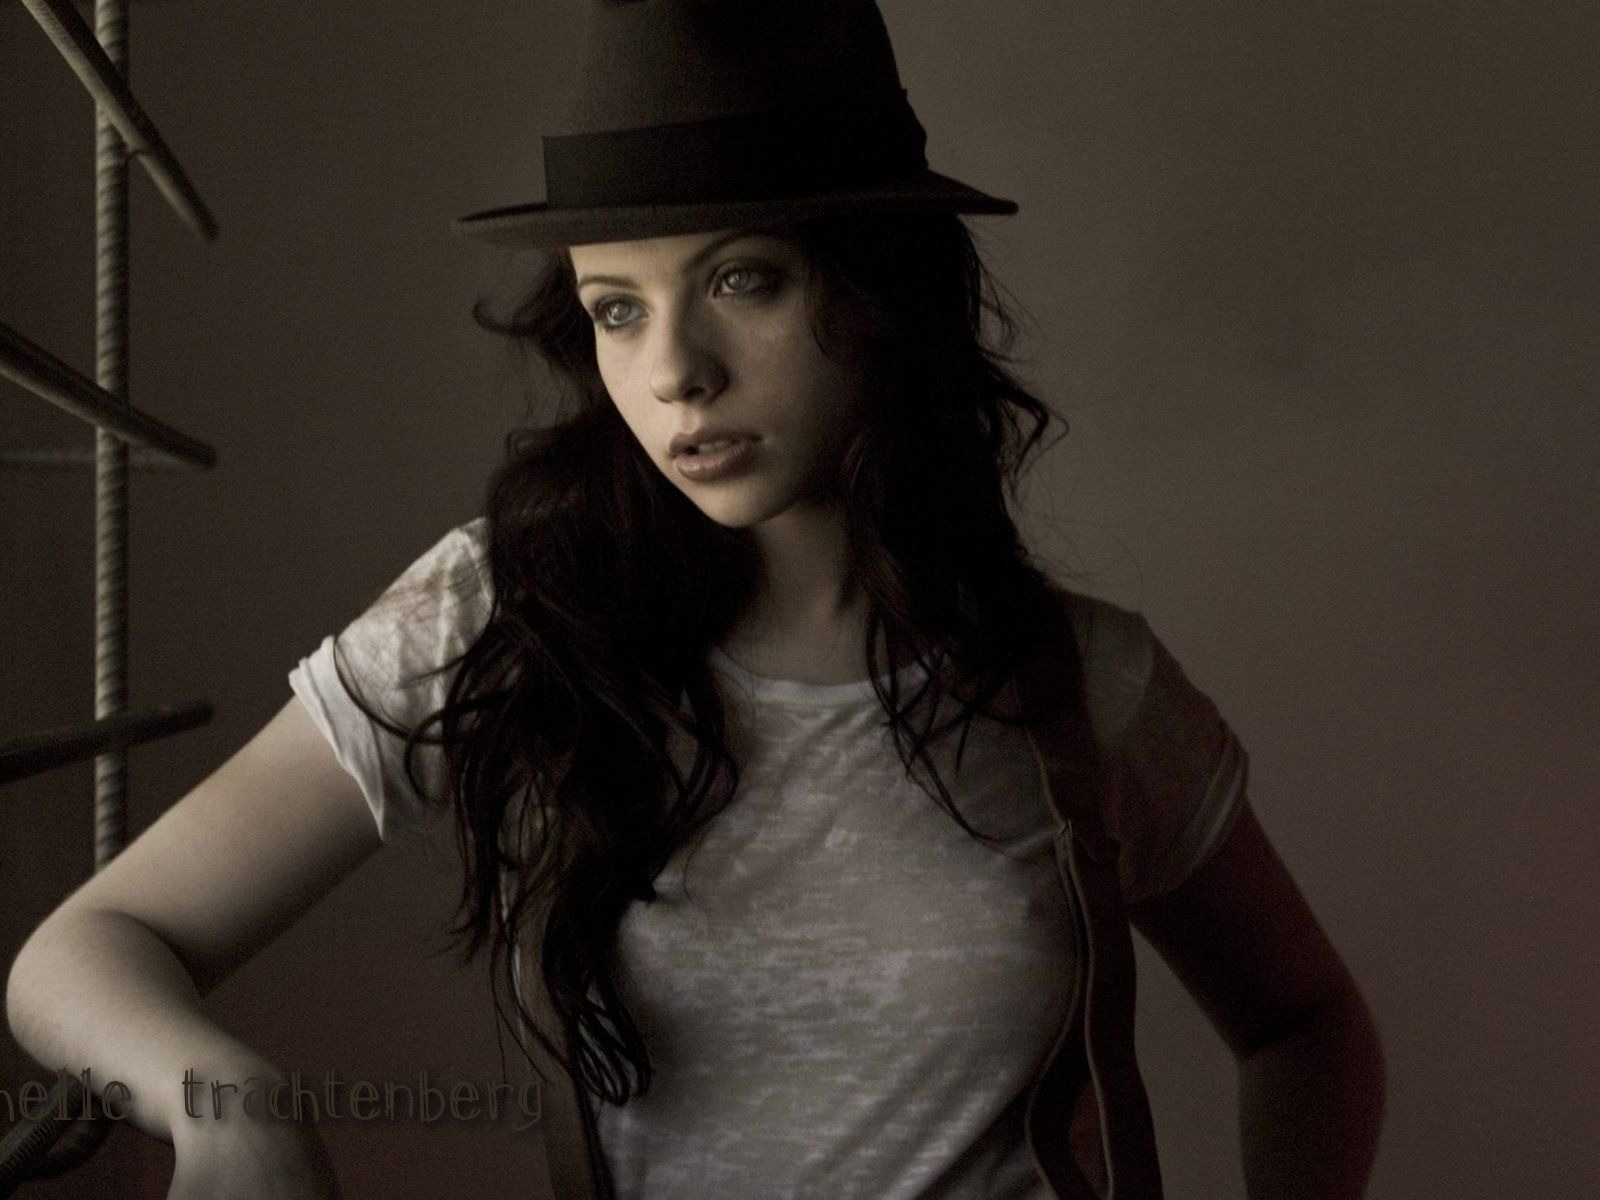 Michelle Trachtenberg #007 - 1600x1200 Wallpapers Pictures Photos Images